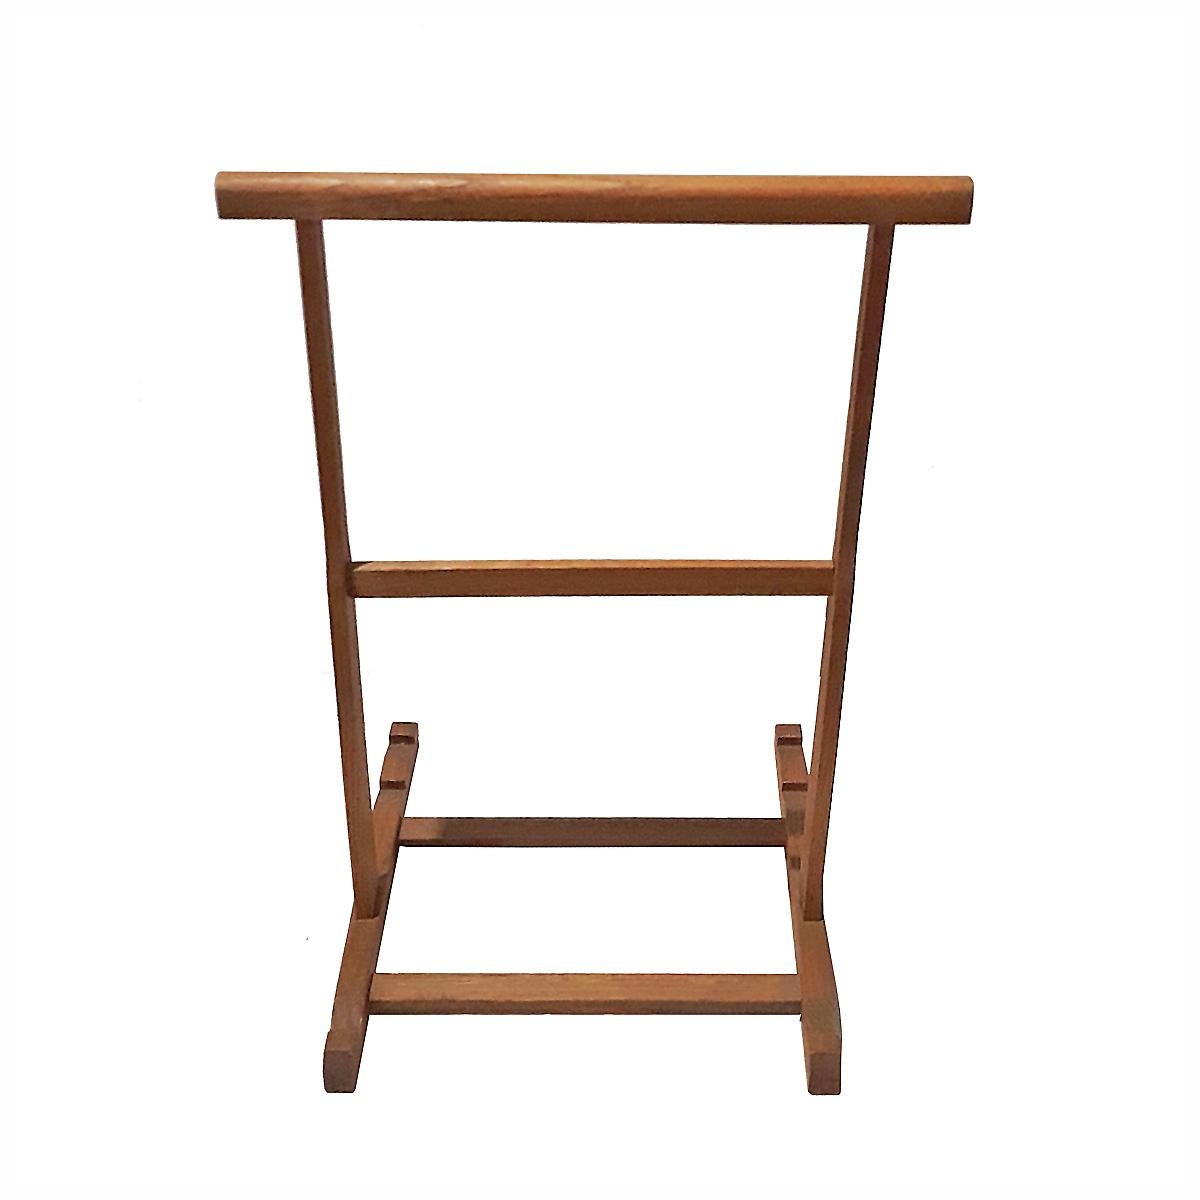 Arts and Crafts Mid-20th Century Wood Table Easel / Picture Stand from France For Sale